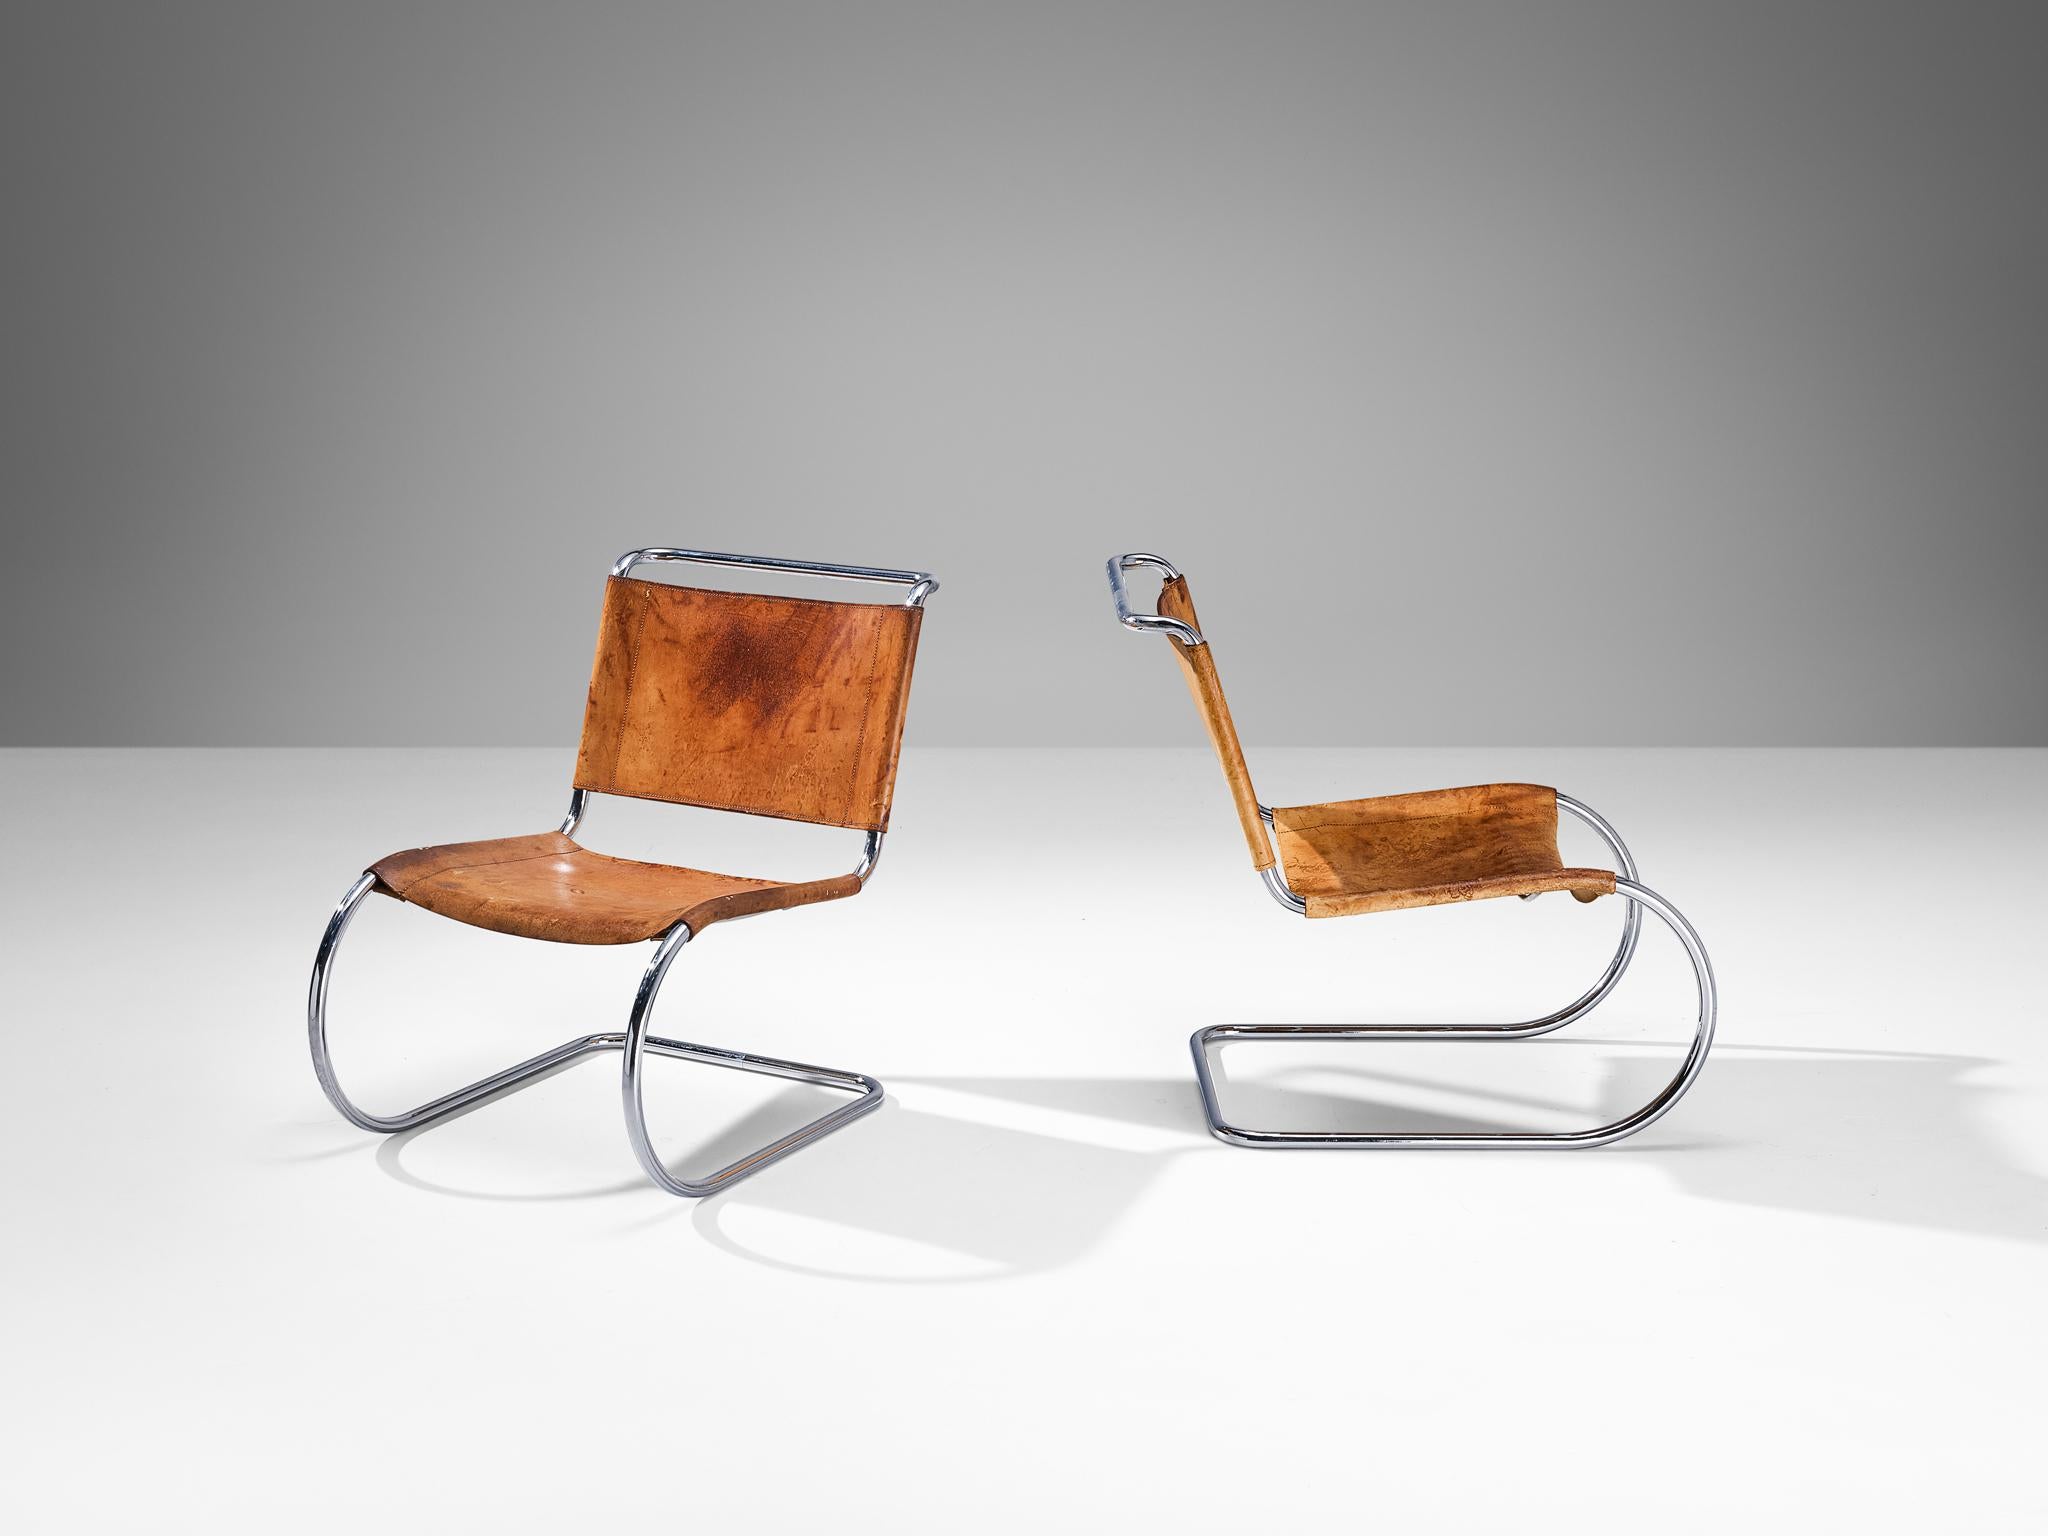 Pair of cantilever dining chairs, leather, chrome-plated steel, The Netherlands, 1960s

Streamlined pair of cantilever chairs, a design that originates from the Bauhaus Movement. The frame is comprised of a cantilevered tubular frame, giving it a